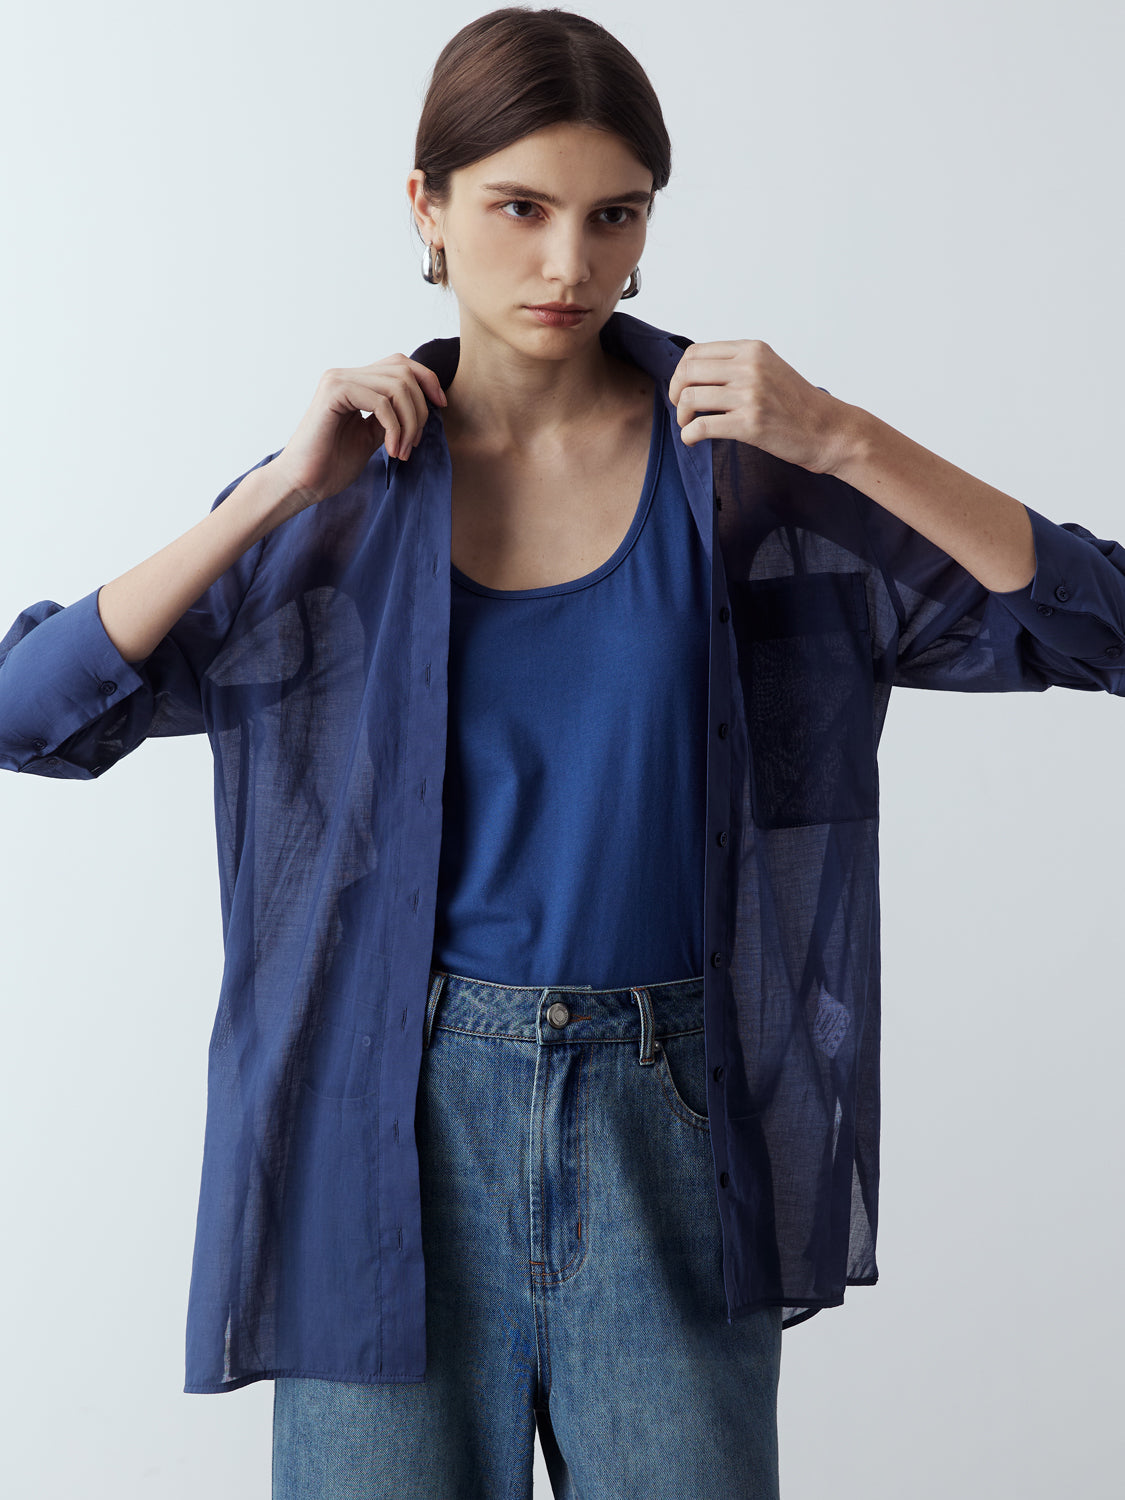 dark blue : Model is wearing the Sheer Long Sleeve Shirt in Dark Blue, which comes with a straight hem, front placket with buttons and a left breast pocket. Worn with the Jersey Tank in Dark Blue, the Denim Straight Cut Jeans and metallic silver heels.